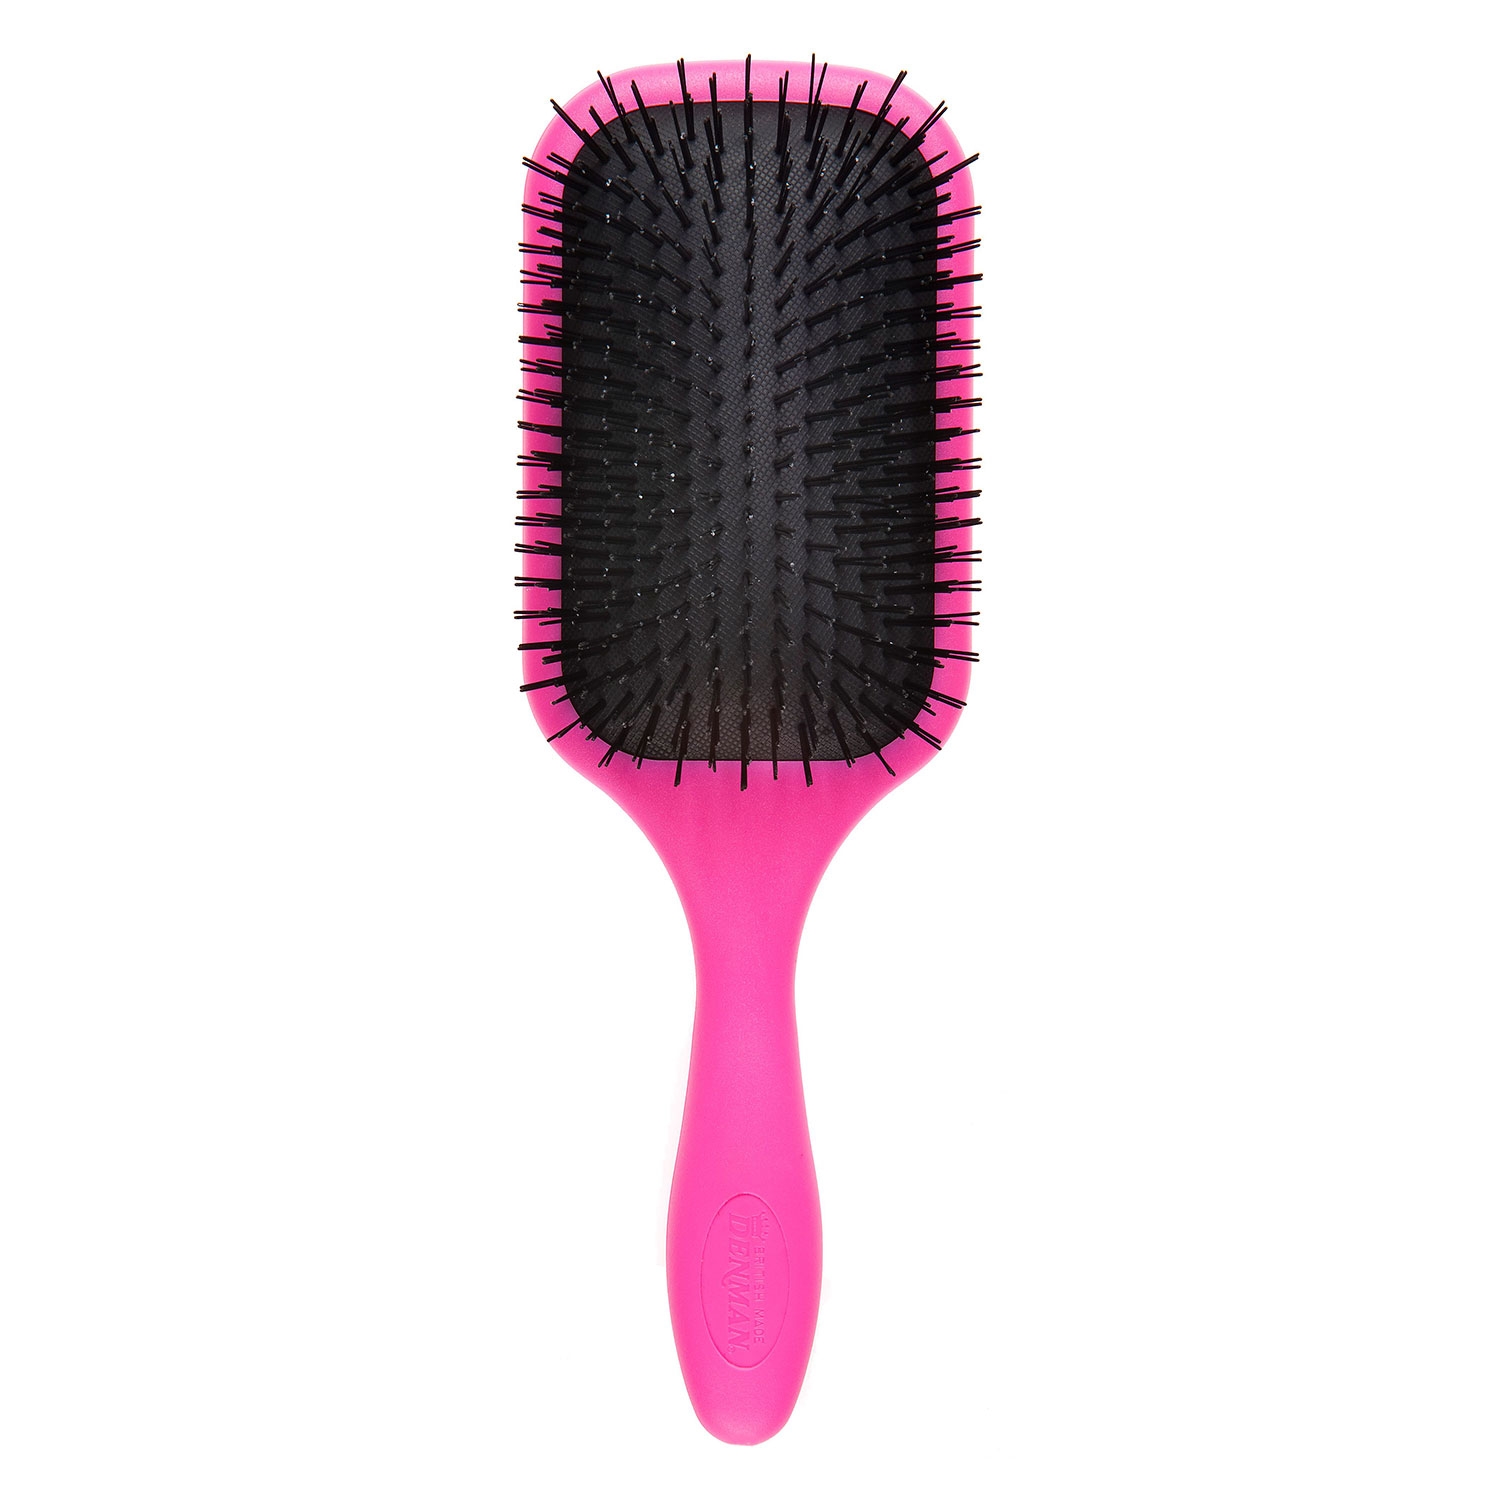 Product image from Tangle Tamer - Detangling-Brush pink